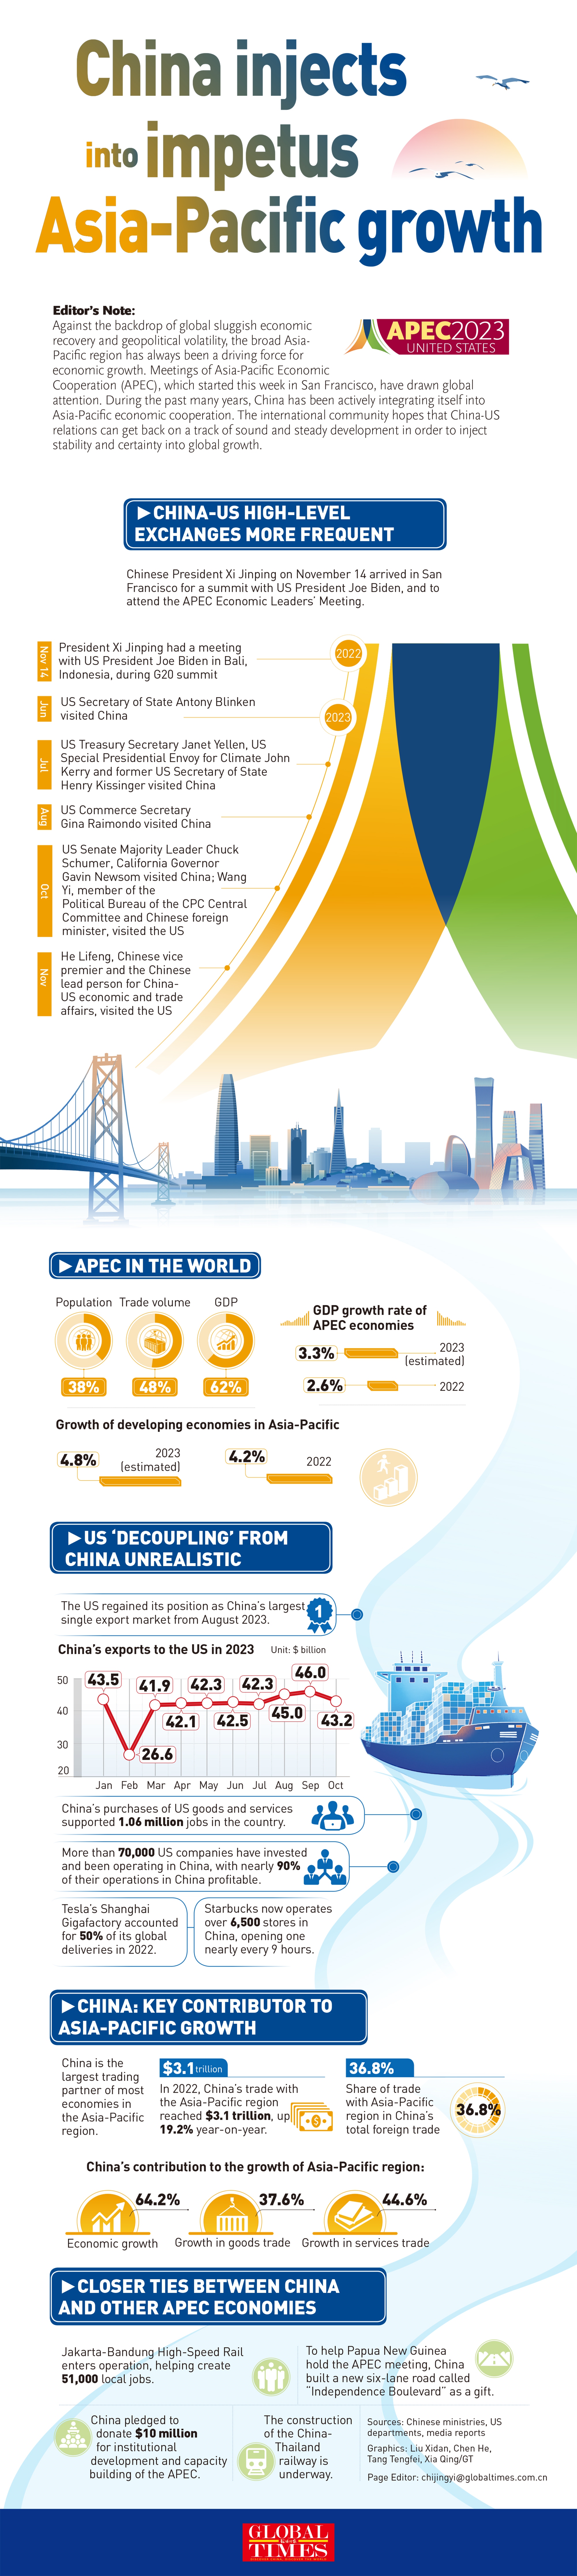 China injects impetus into Asia-Pacific growth Infographic: GT